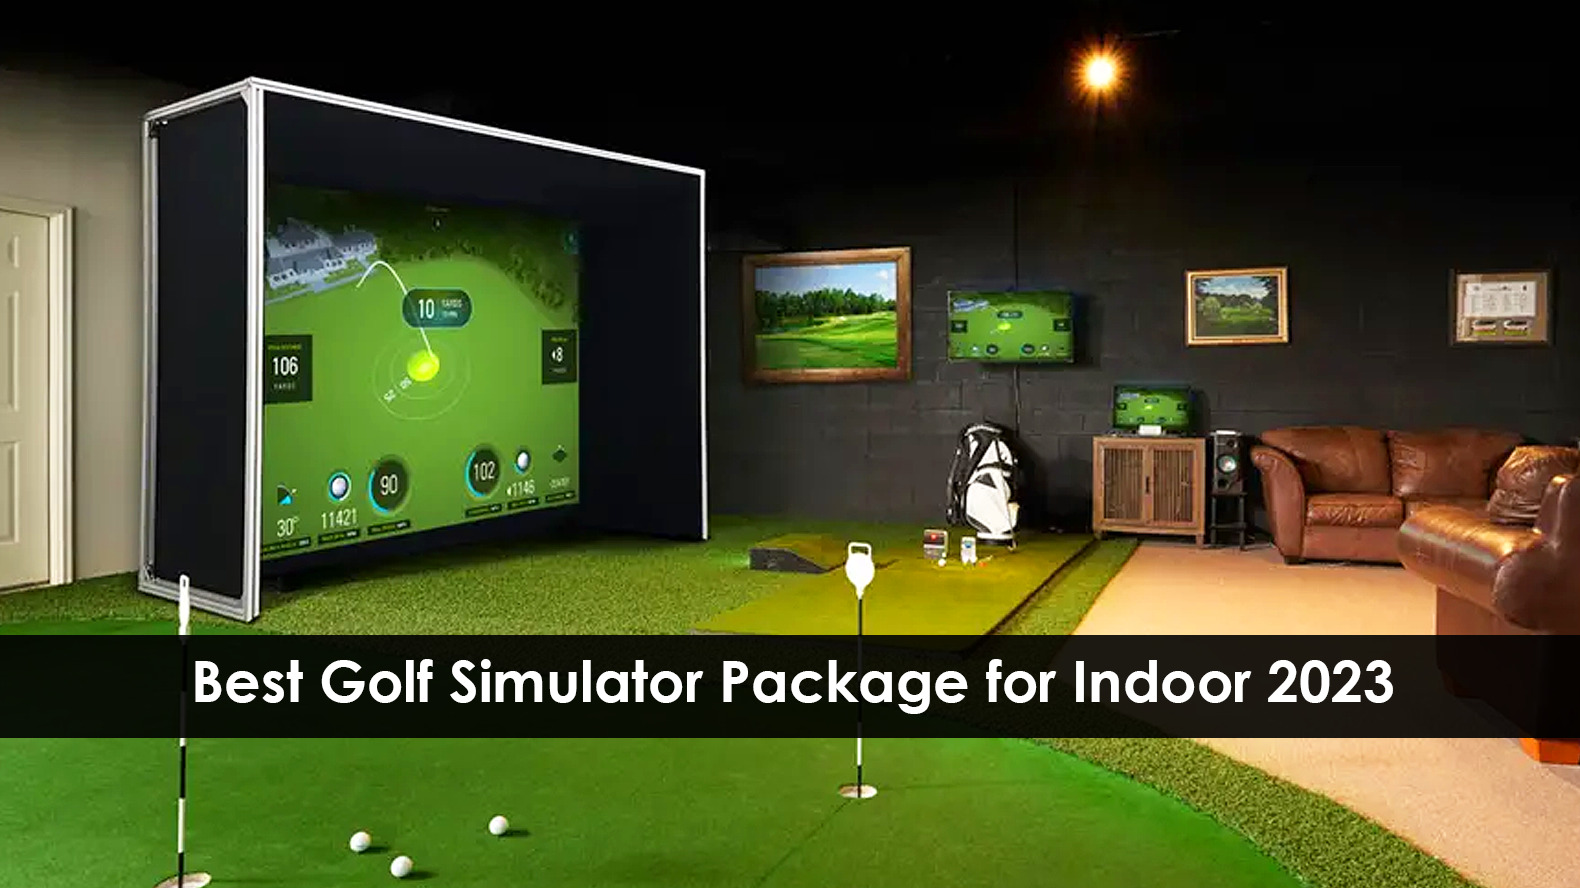 Which is Best Golf Simulator Package for Indoor